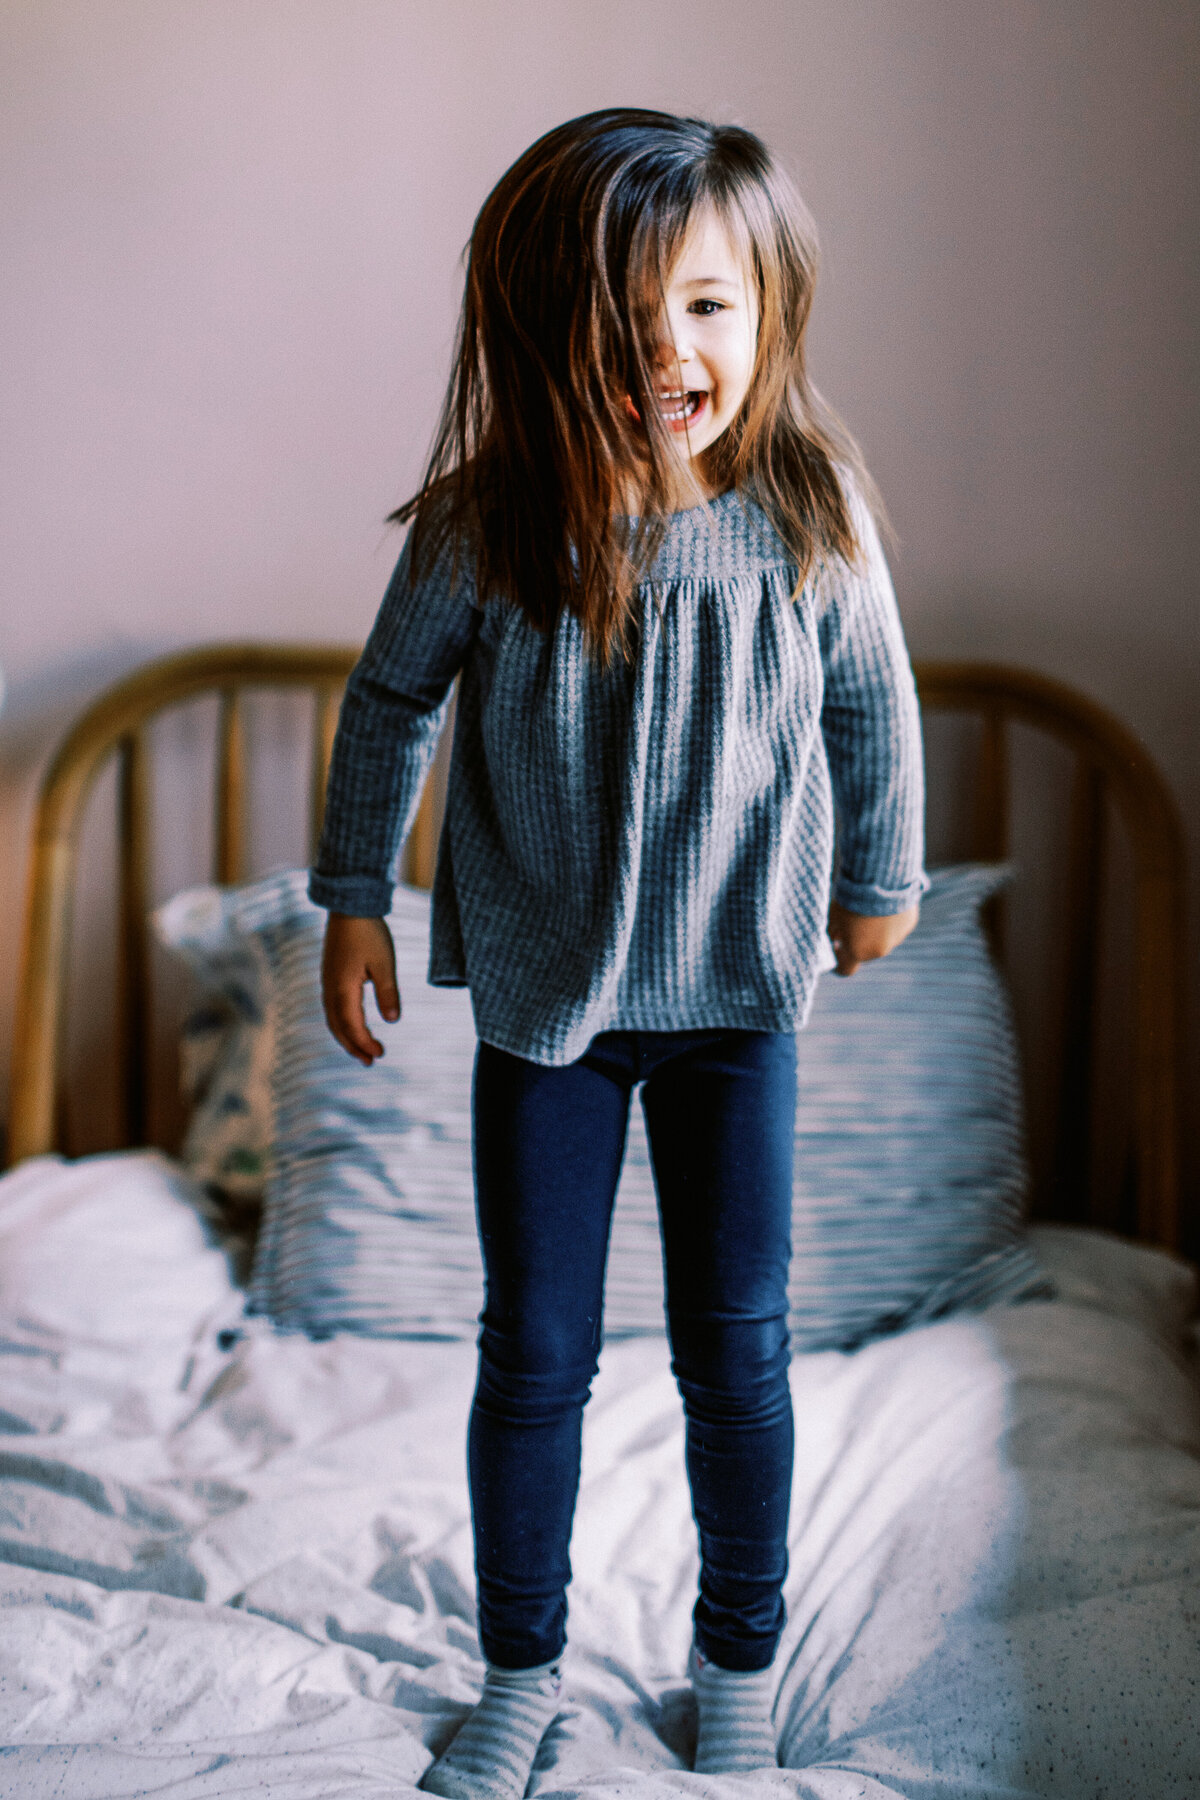 daughter jumping on bed